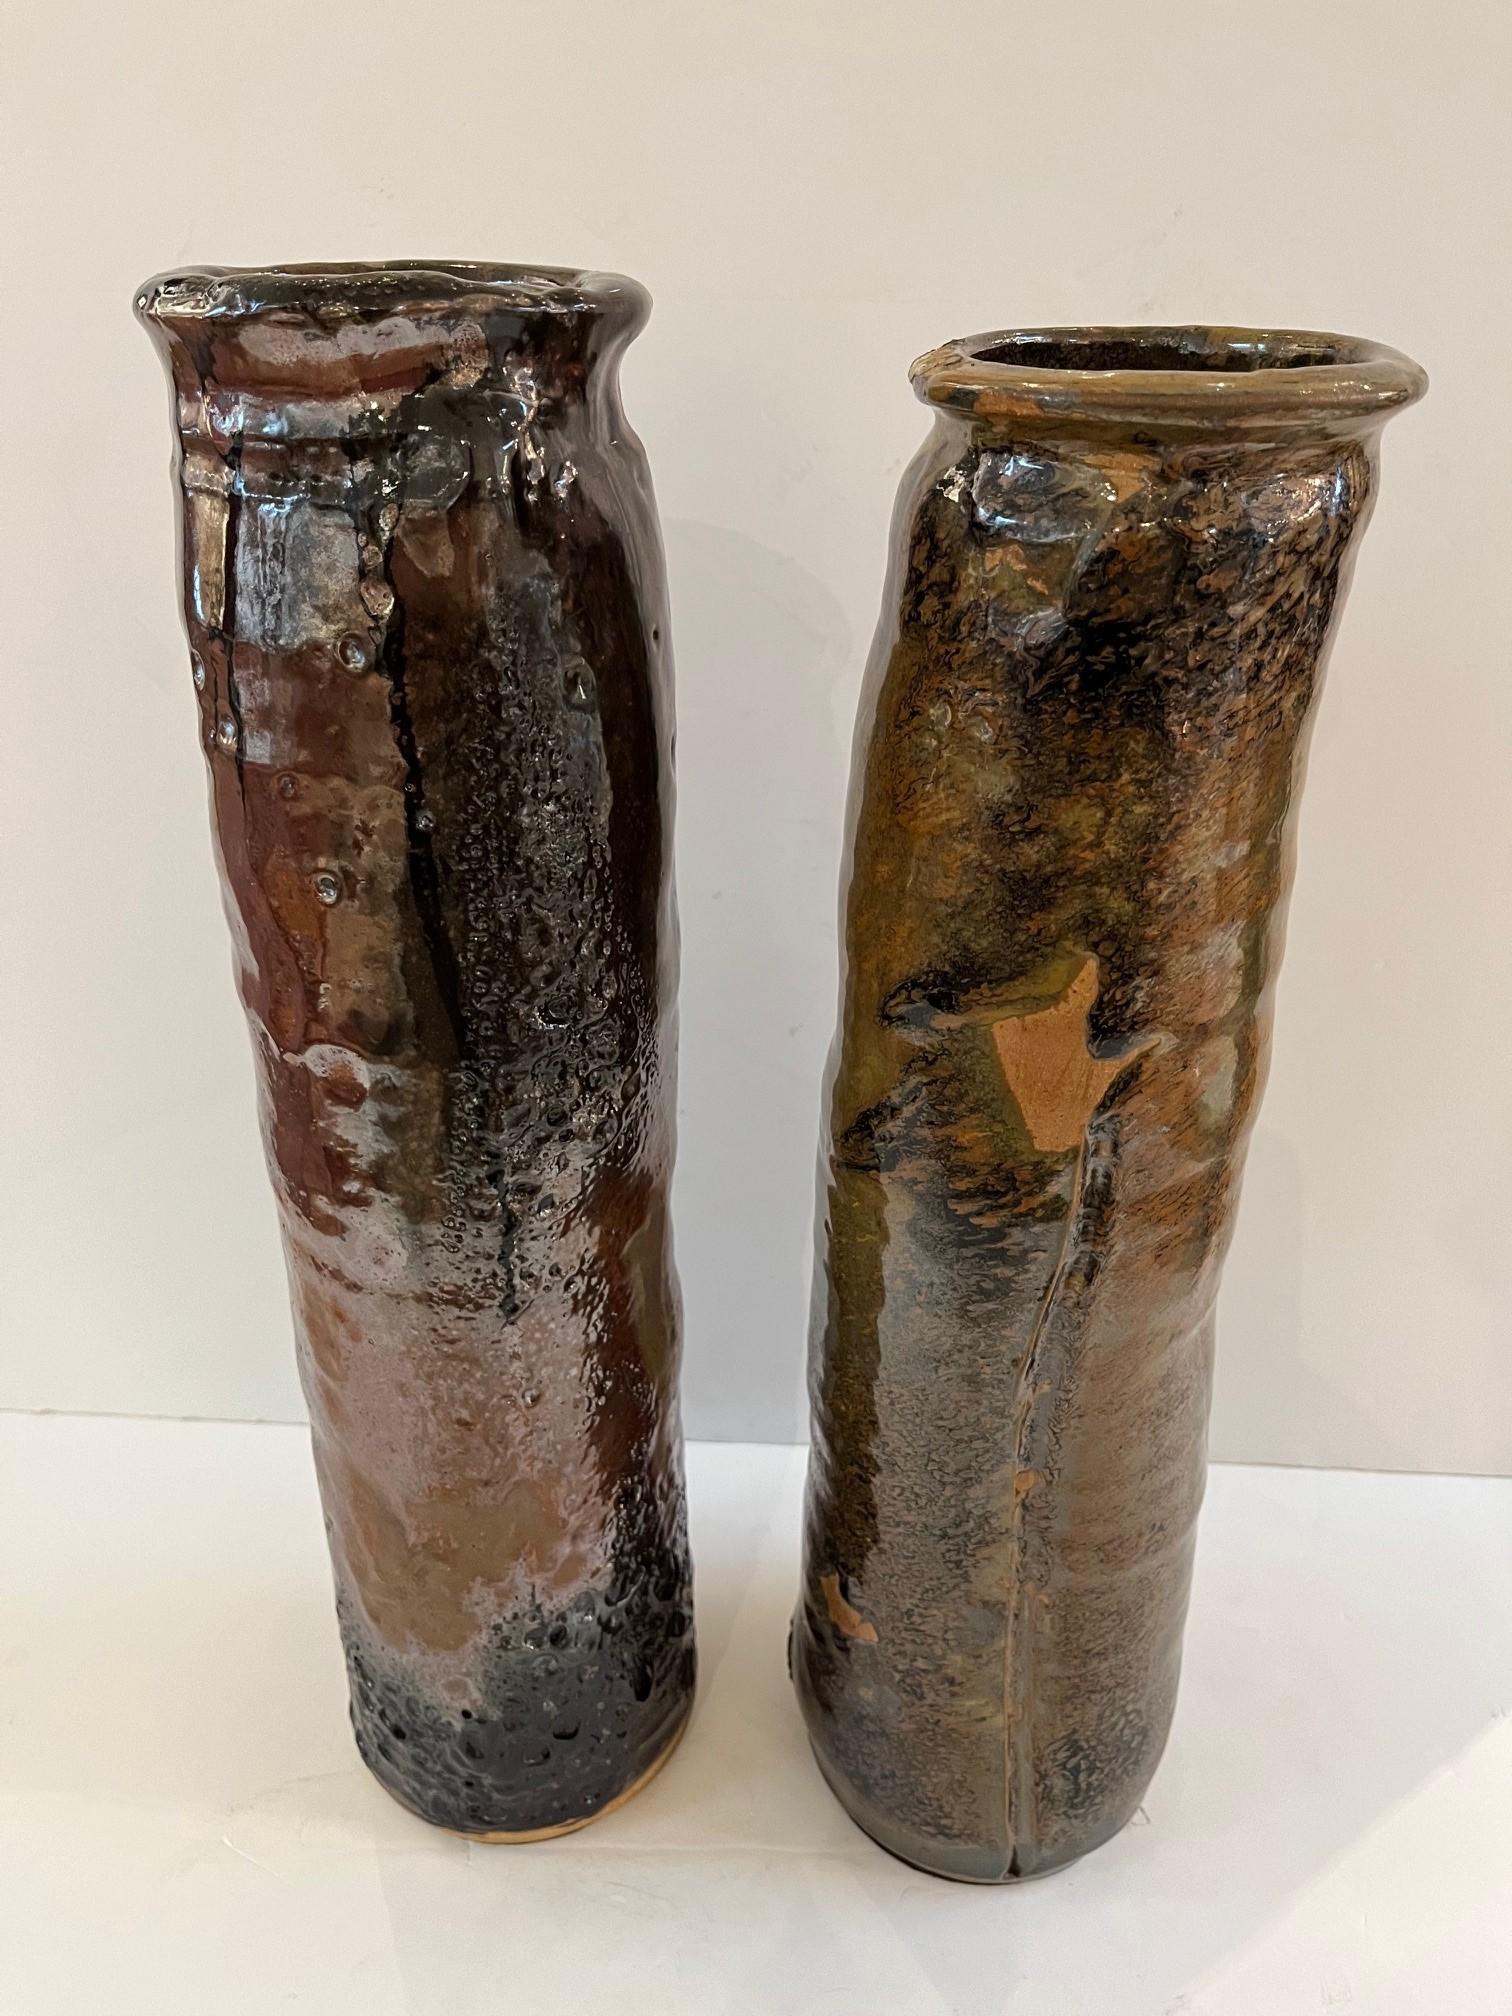 Pair of Vintage Tall Rare Uniquely Glazed Ceramic Vase by Ichiban For Sale 2